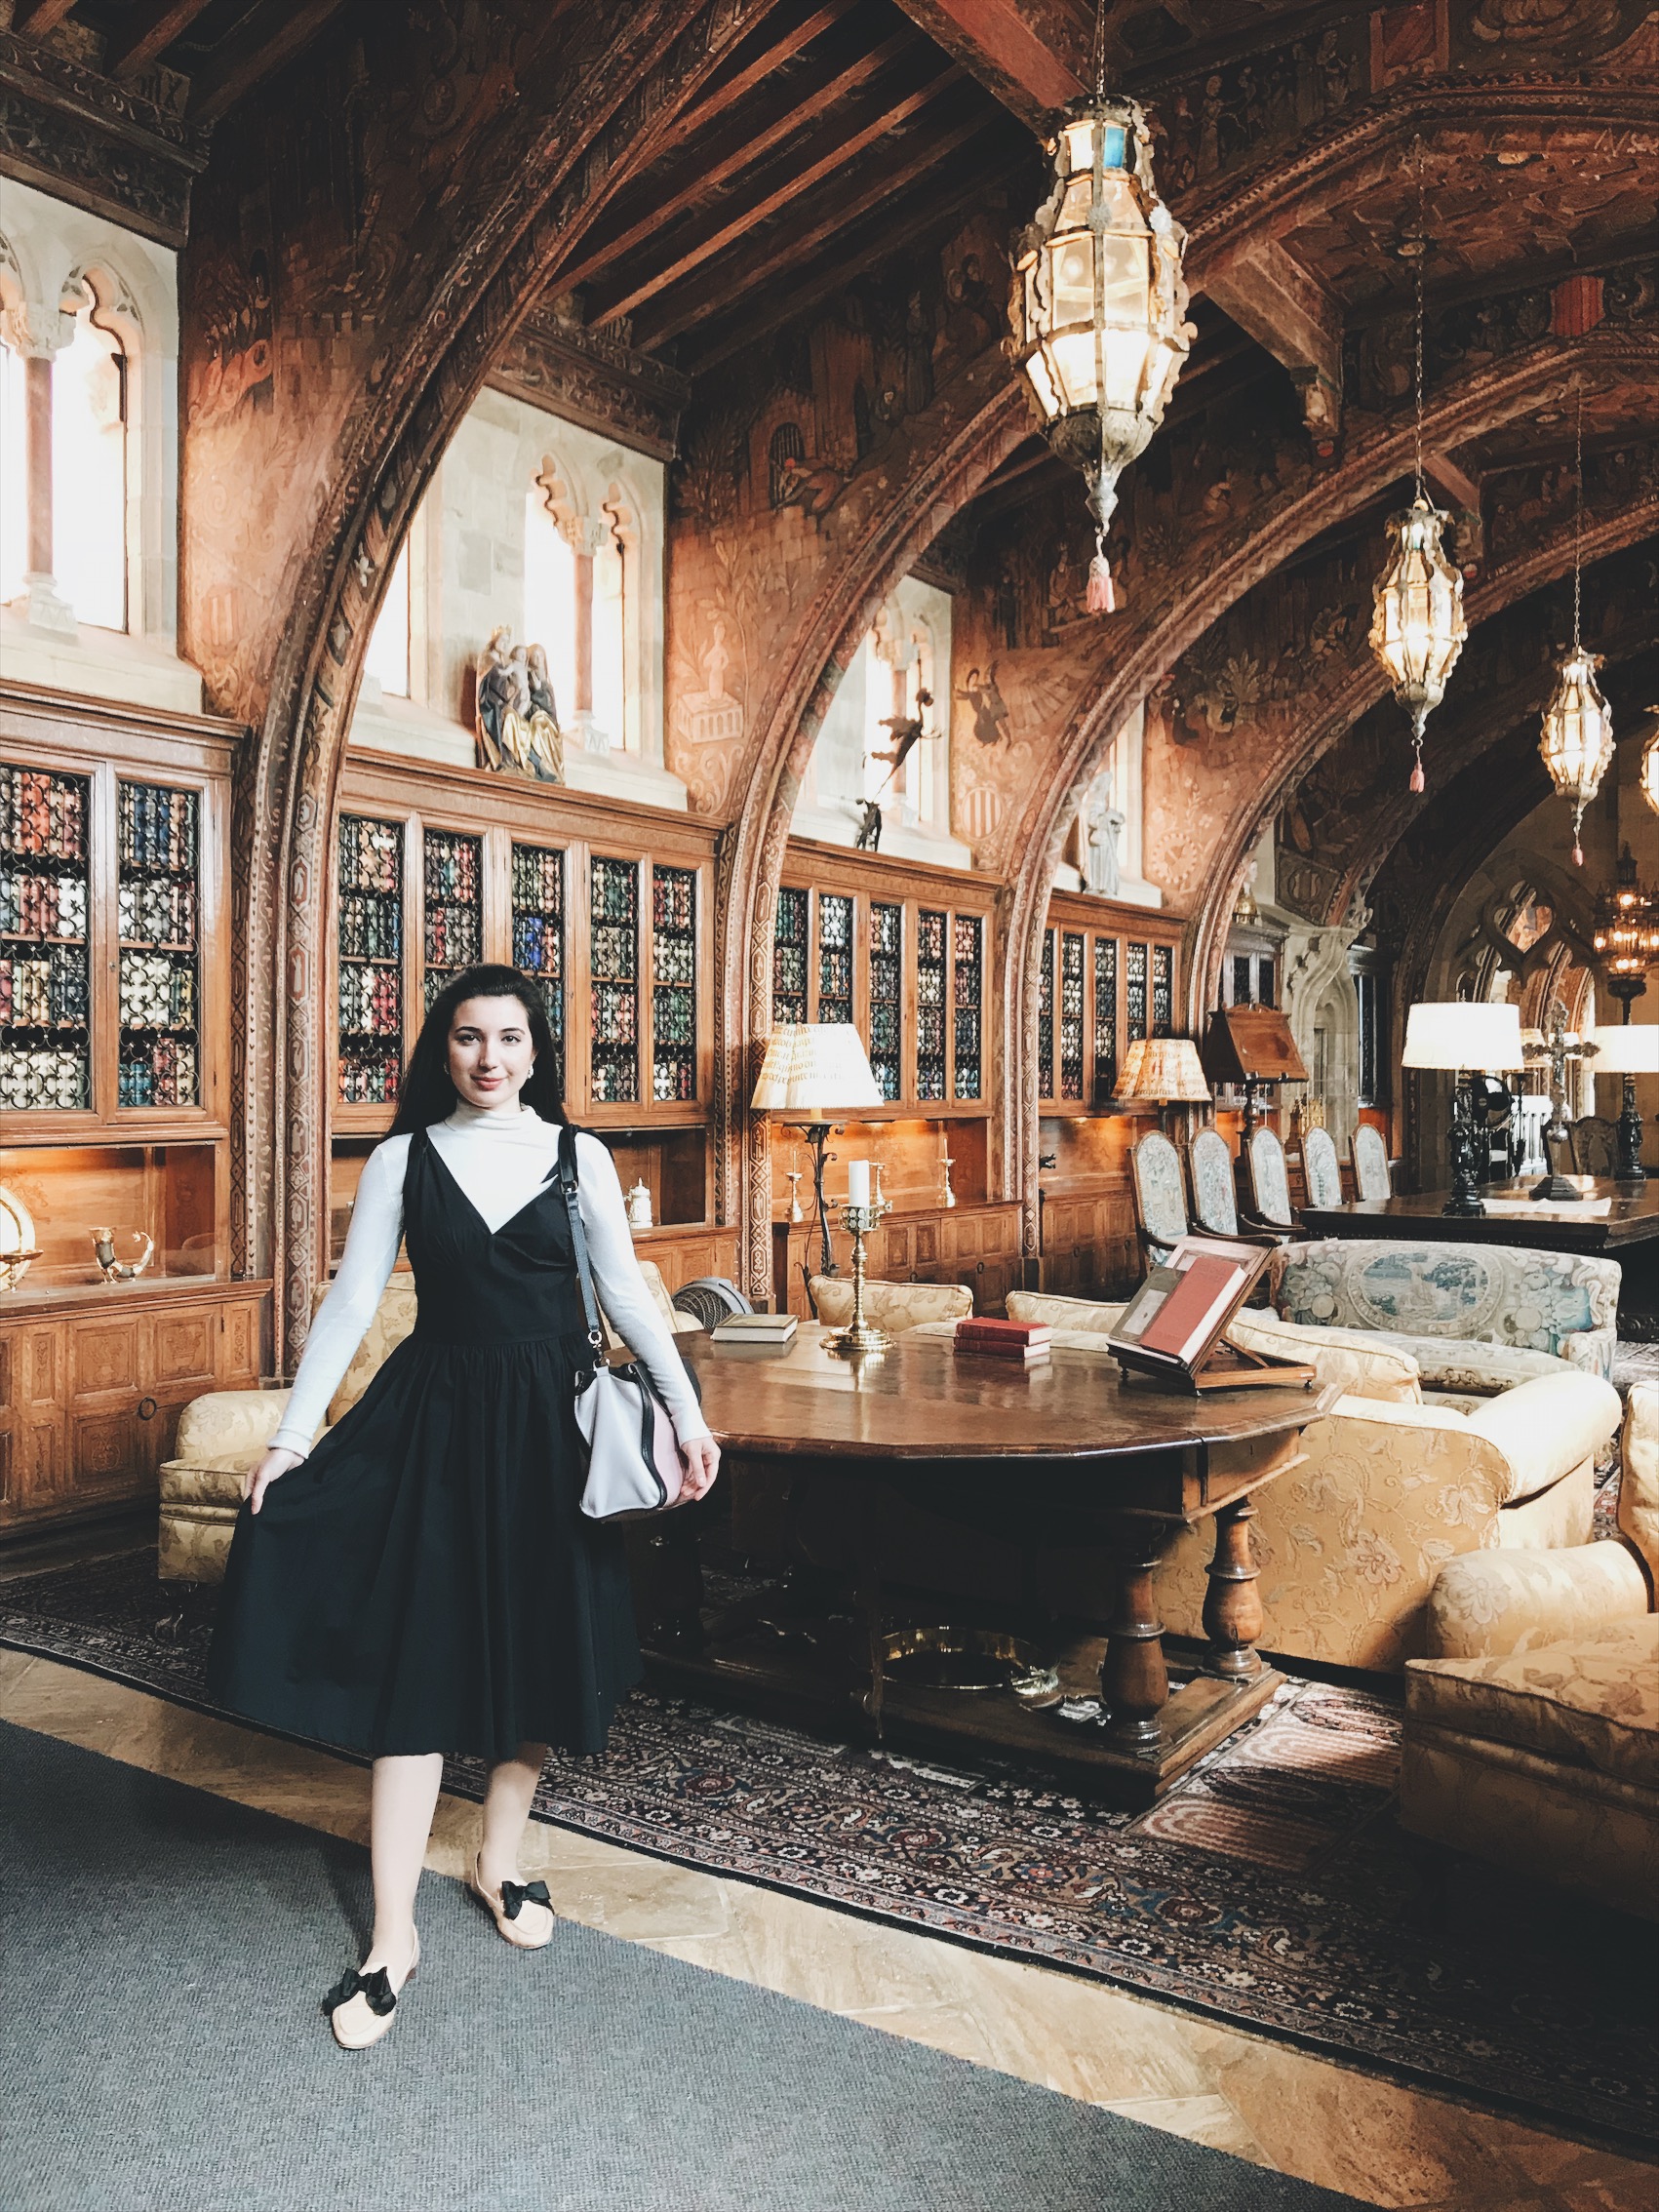 Hearst Castle, California Travel, castle, nineteenth century, lookbook, fashion blogger, fashion, style, style blogger, travel, travel blogger, black dress, white turtleneck, Kate Spade, loafers, European architecture, outfit of the day, ootd, look of the day, Greek architecture, history, 19th Century art